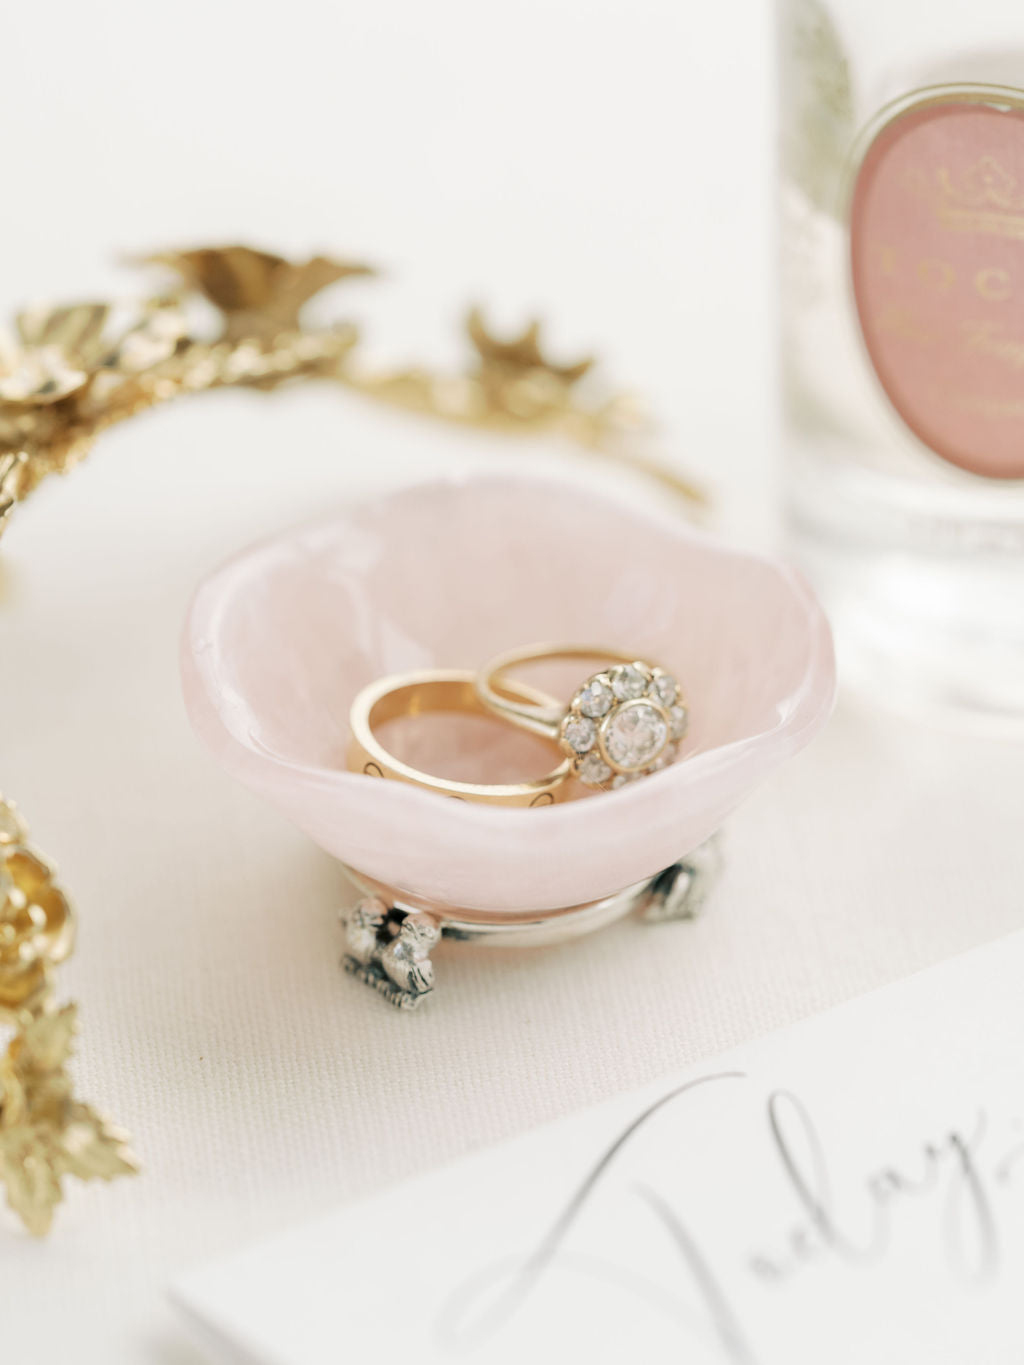 Rose quartz engagement ring dish with silver love bird feet. Hand-carved quartz made in Italy for the perfect luxury bride gift.